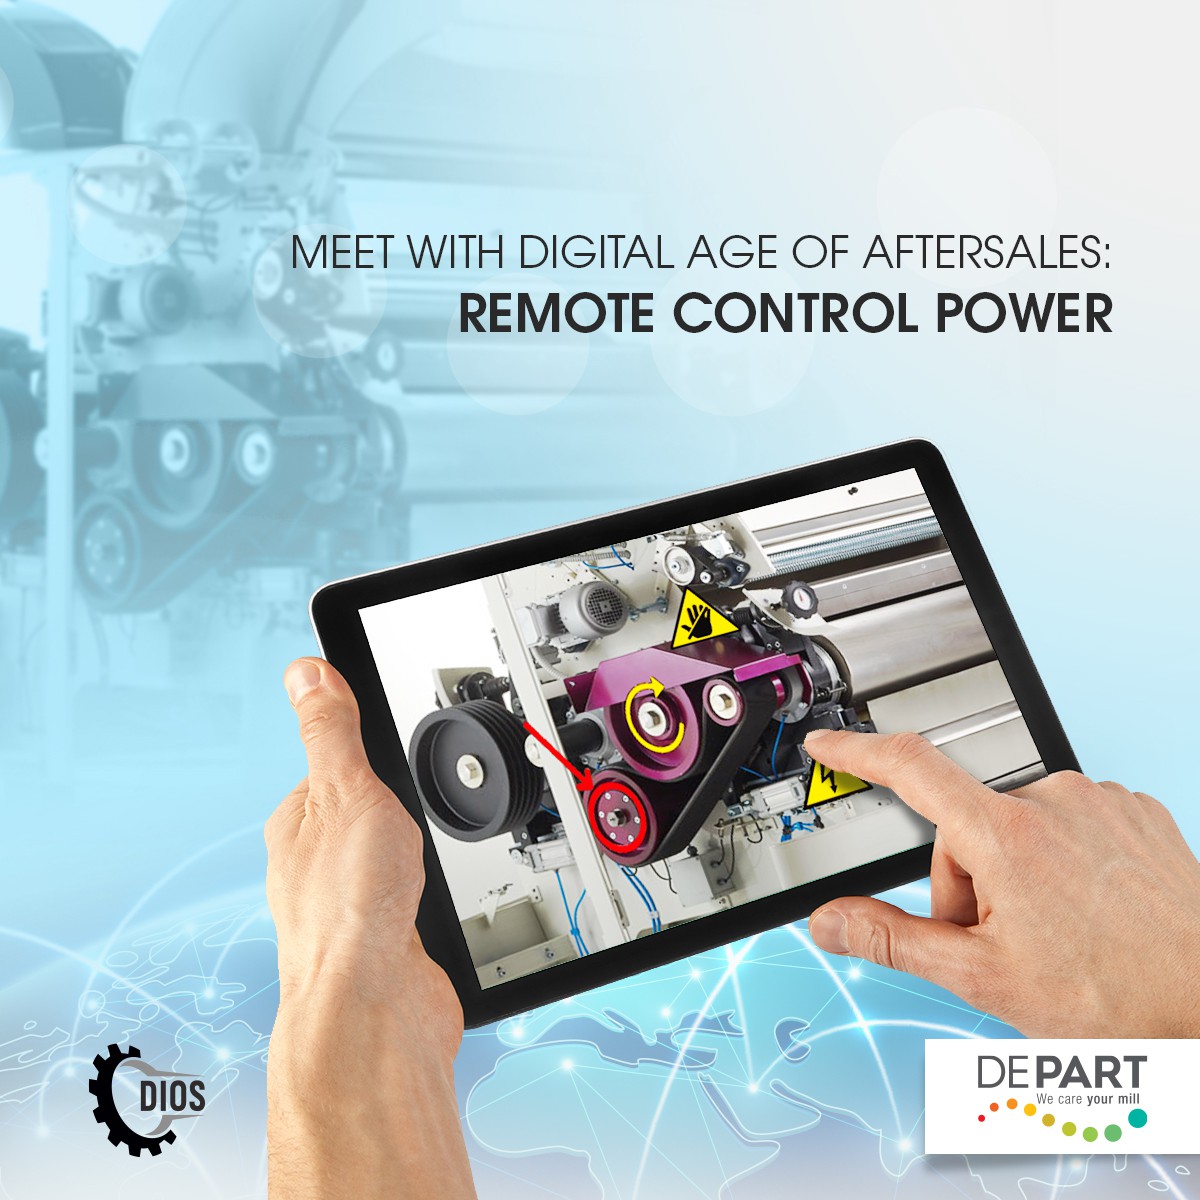 Deserve is proud to announce: MEET WITH DIGITAL AGE OF AFTER SALES: REMOTE CONTROL POWER